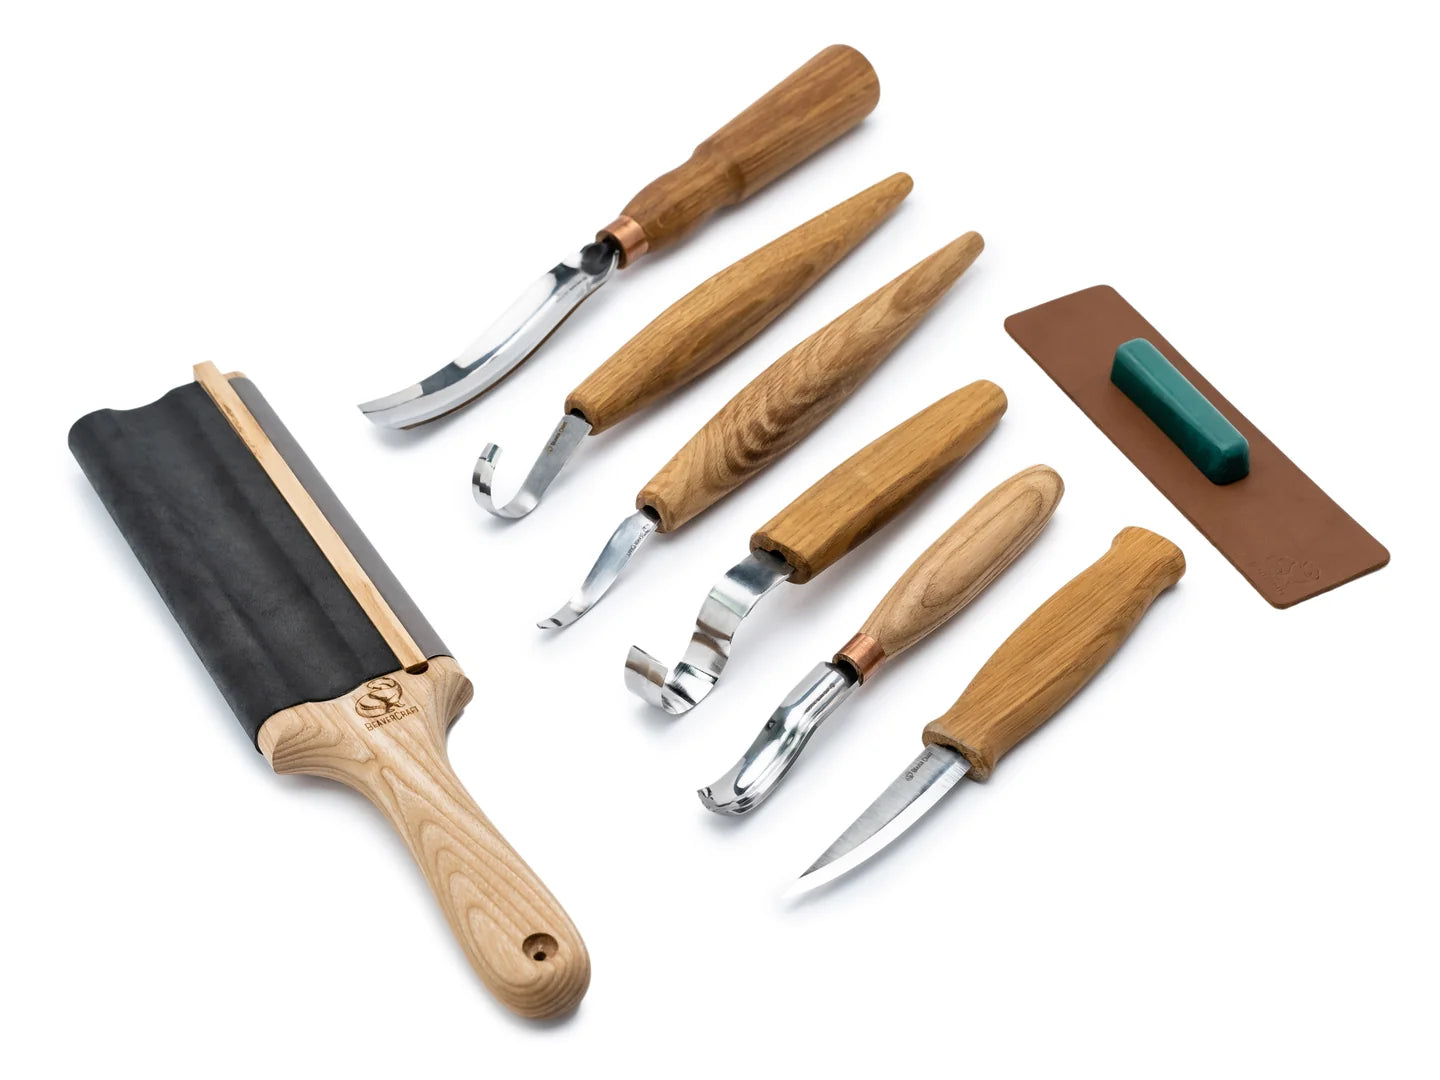 BeaverCraft Spoon Wood Carving Set S49 with geometric wood carving knife